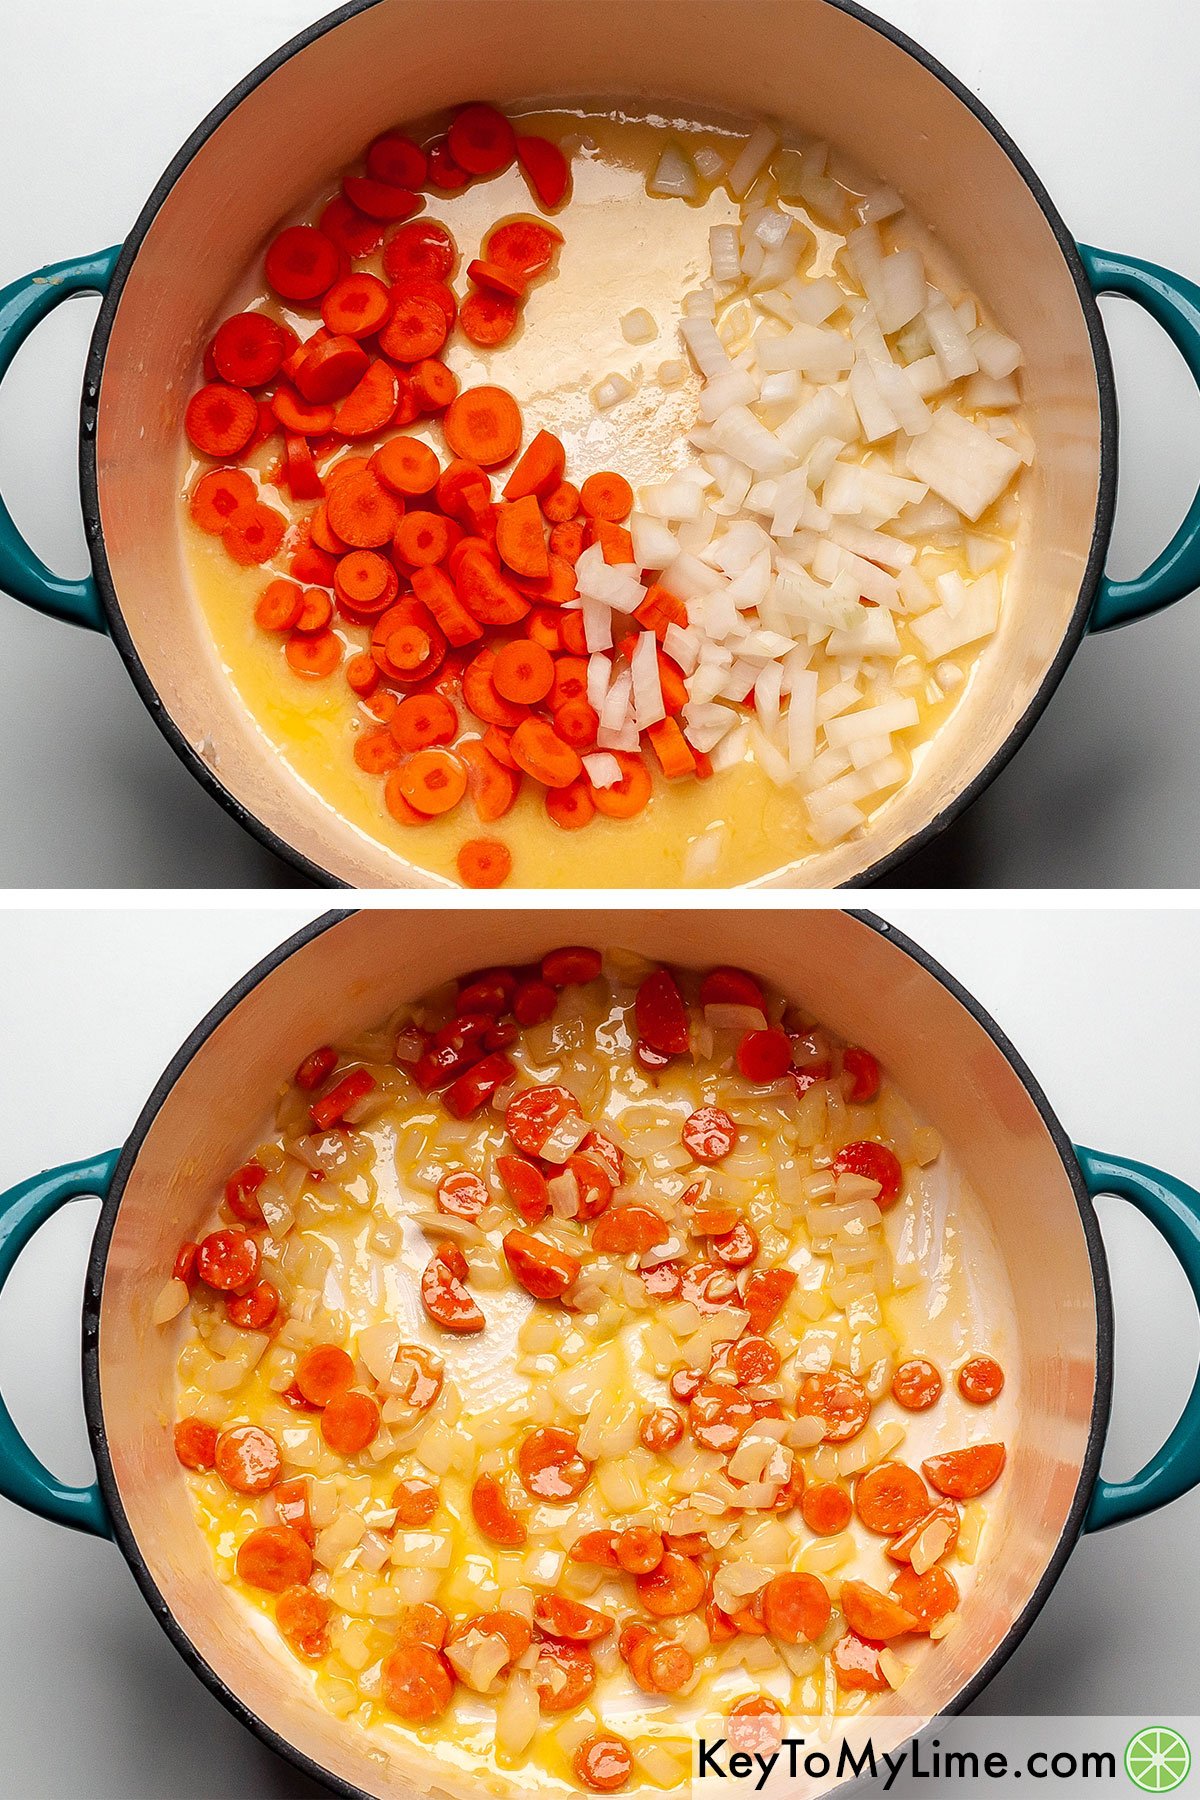 Sauting sliced carrots and chopped onion in butter.